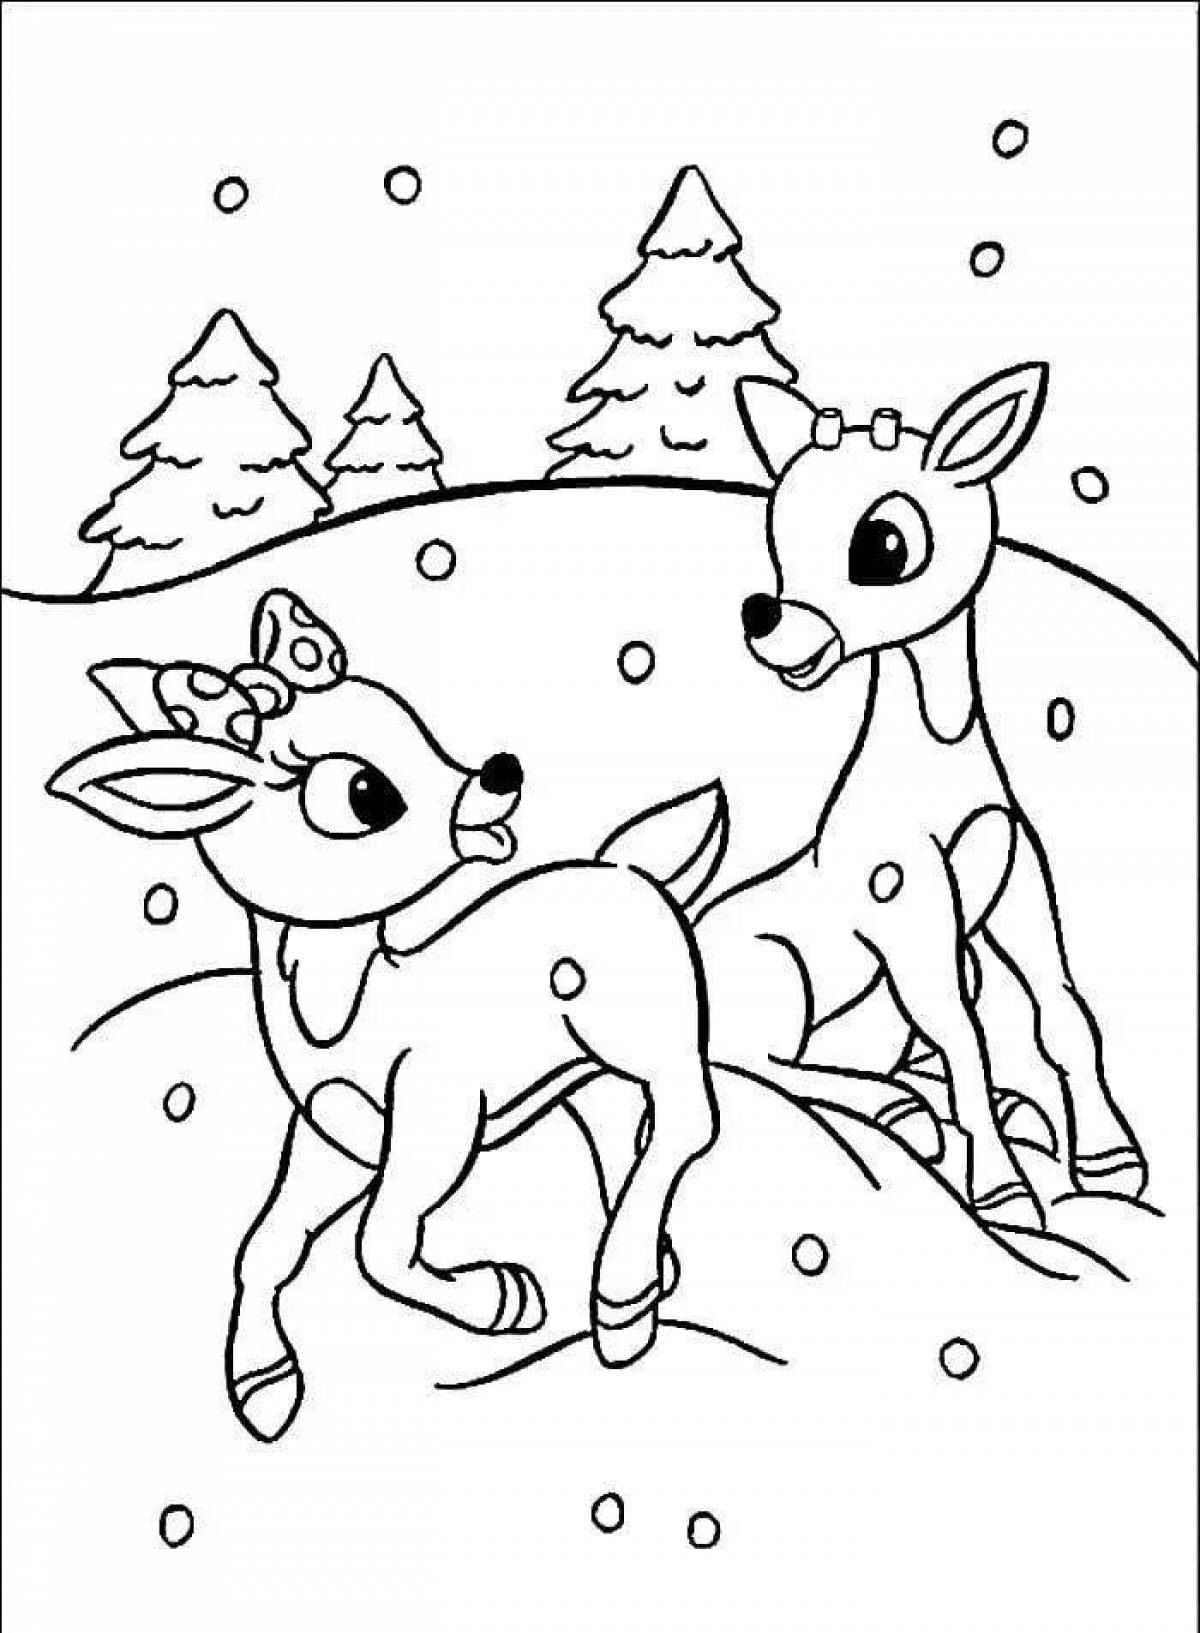 Live deer coloring pages for kids